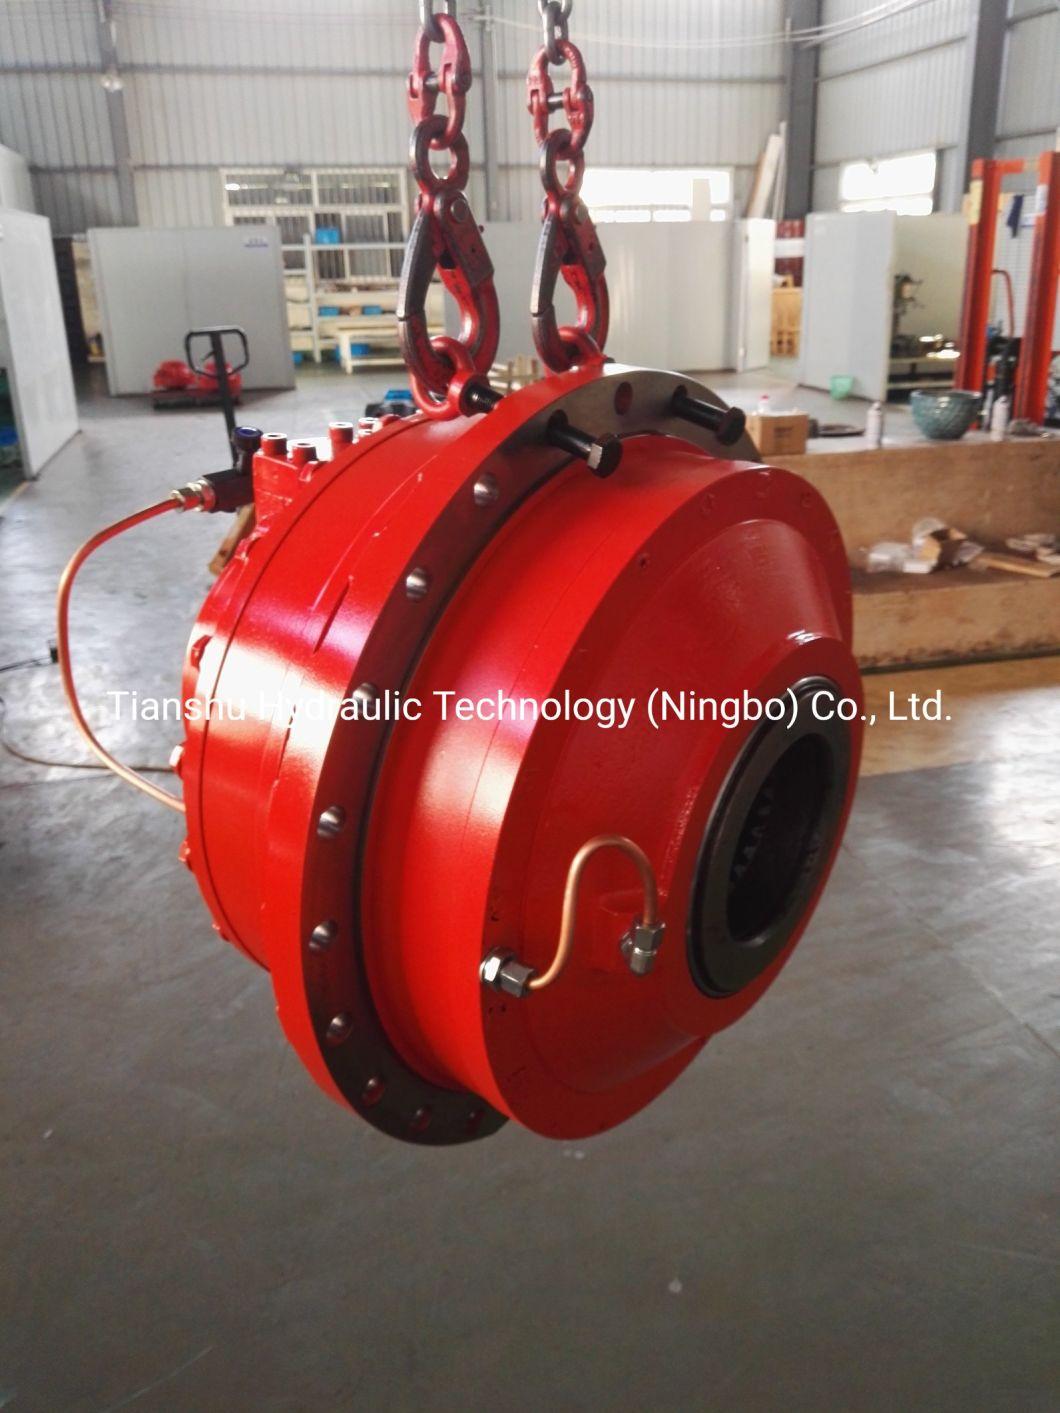 Tianshu Produce Low Speed High Torque Hagglunds Motor Drive Ca Series with Hydraulic Valve, Speed Reducer, Brake